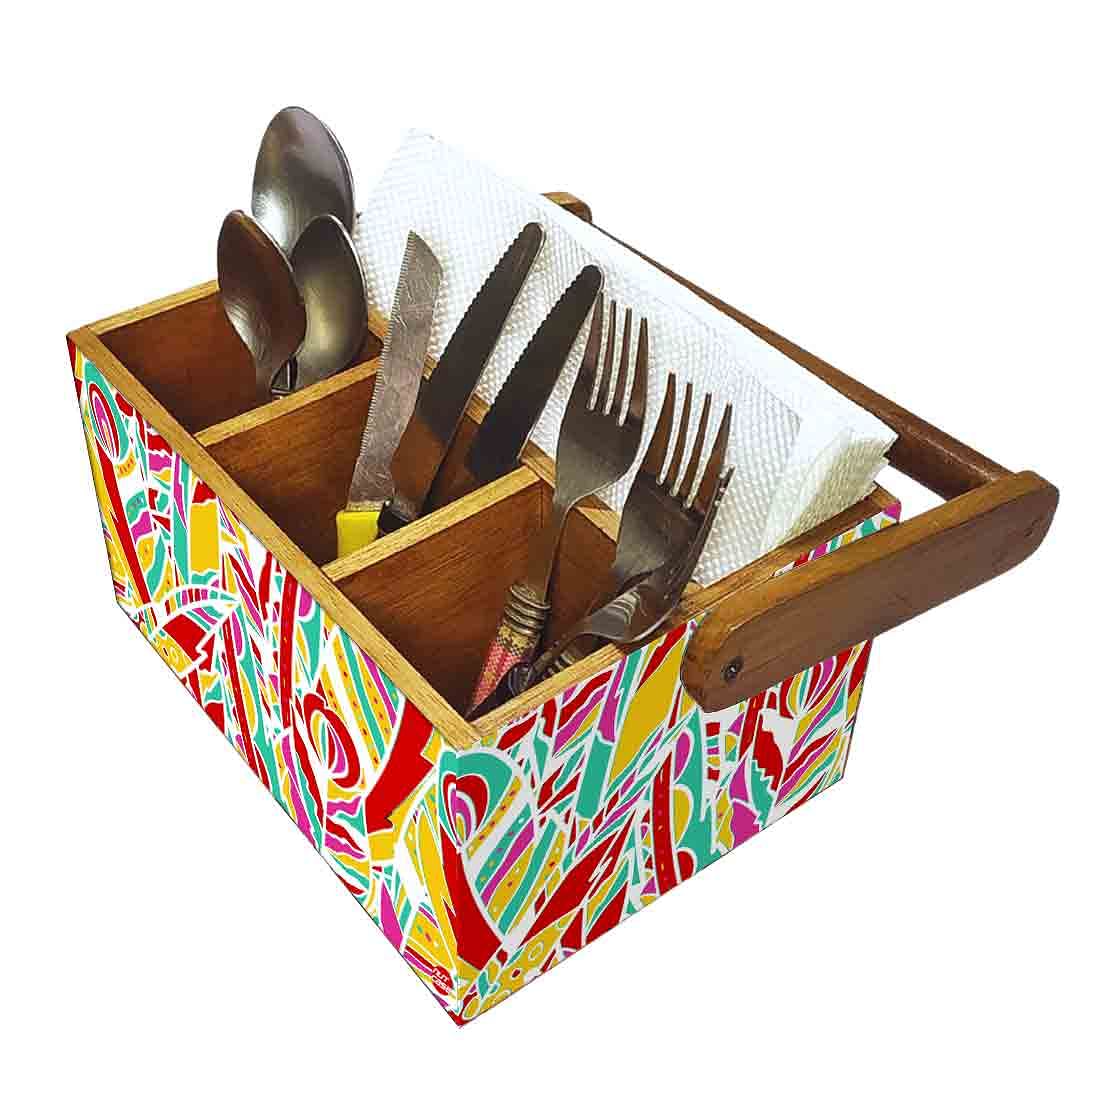 Cutlery Holder Wooden Spoon Stand for Kitchen With Handle - Feathers Nutcase